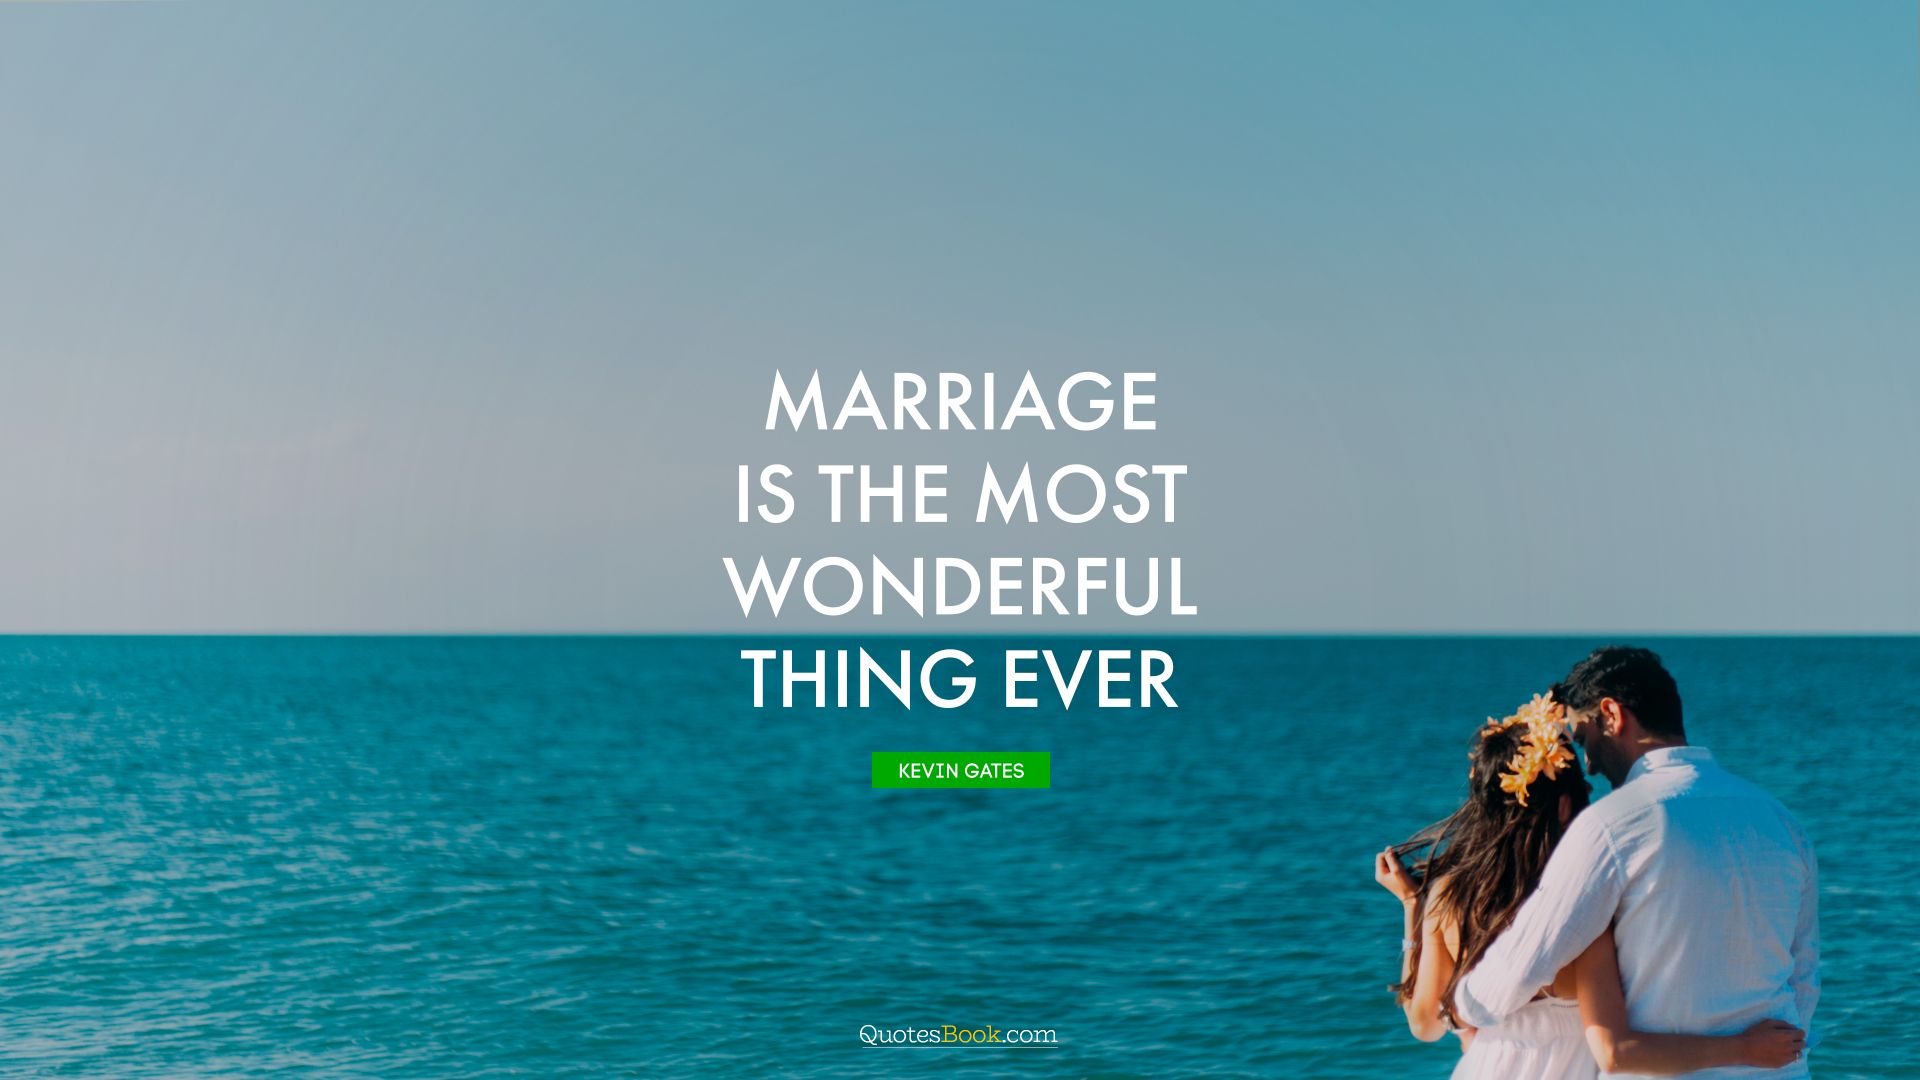 Marriage is the most wonderful thing ever. - Quote by Kevin Gates